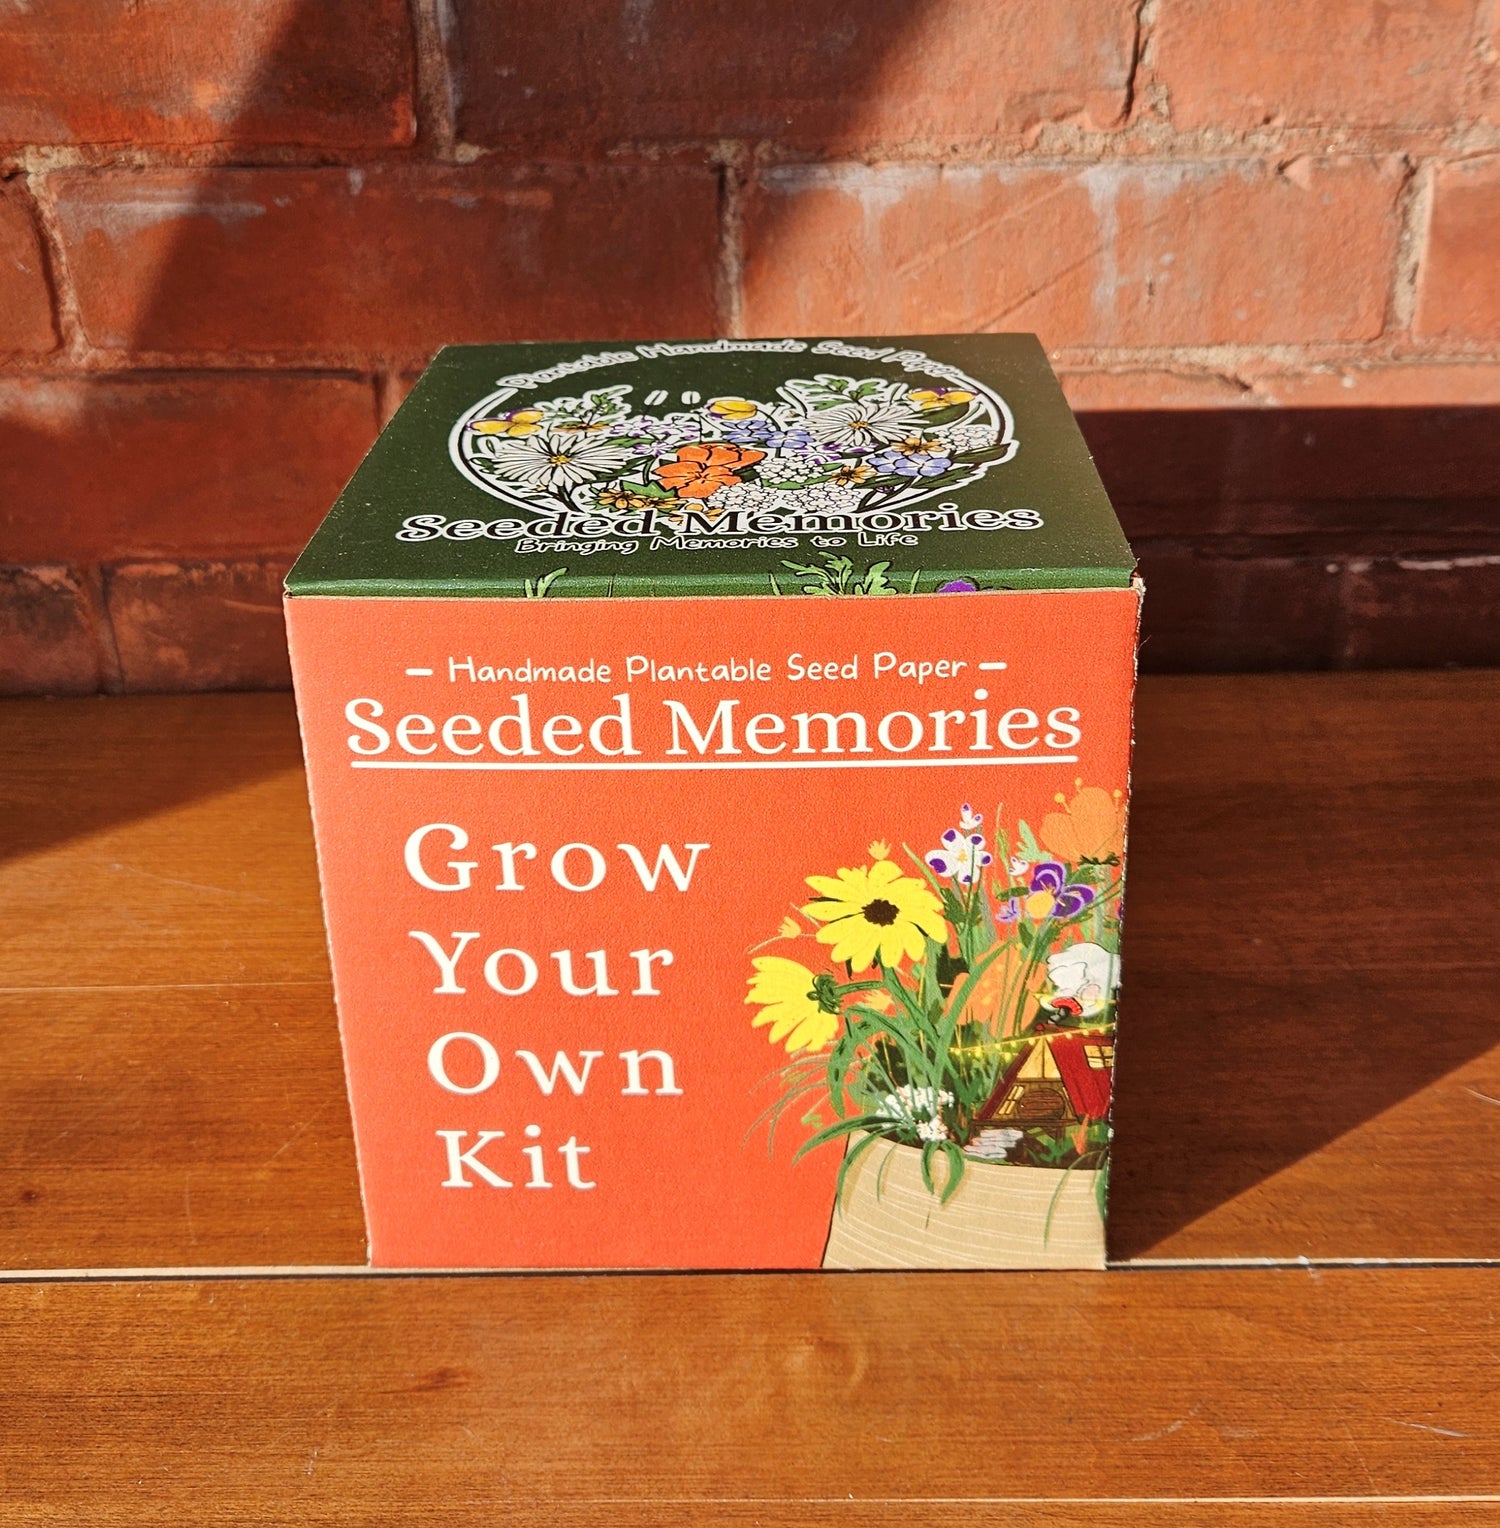 The Grow your own kit!